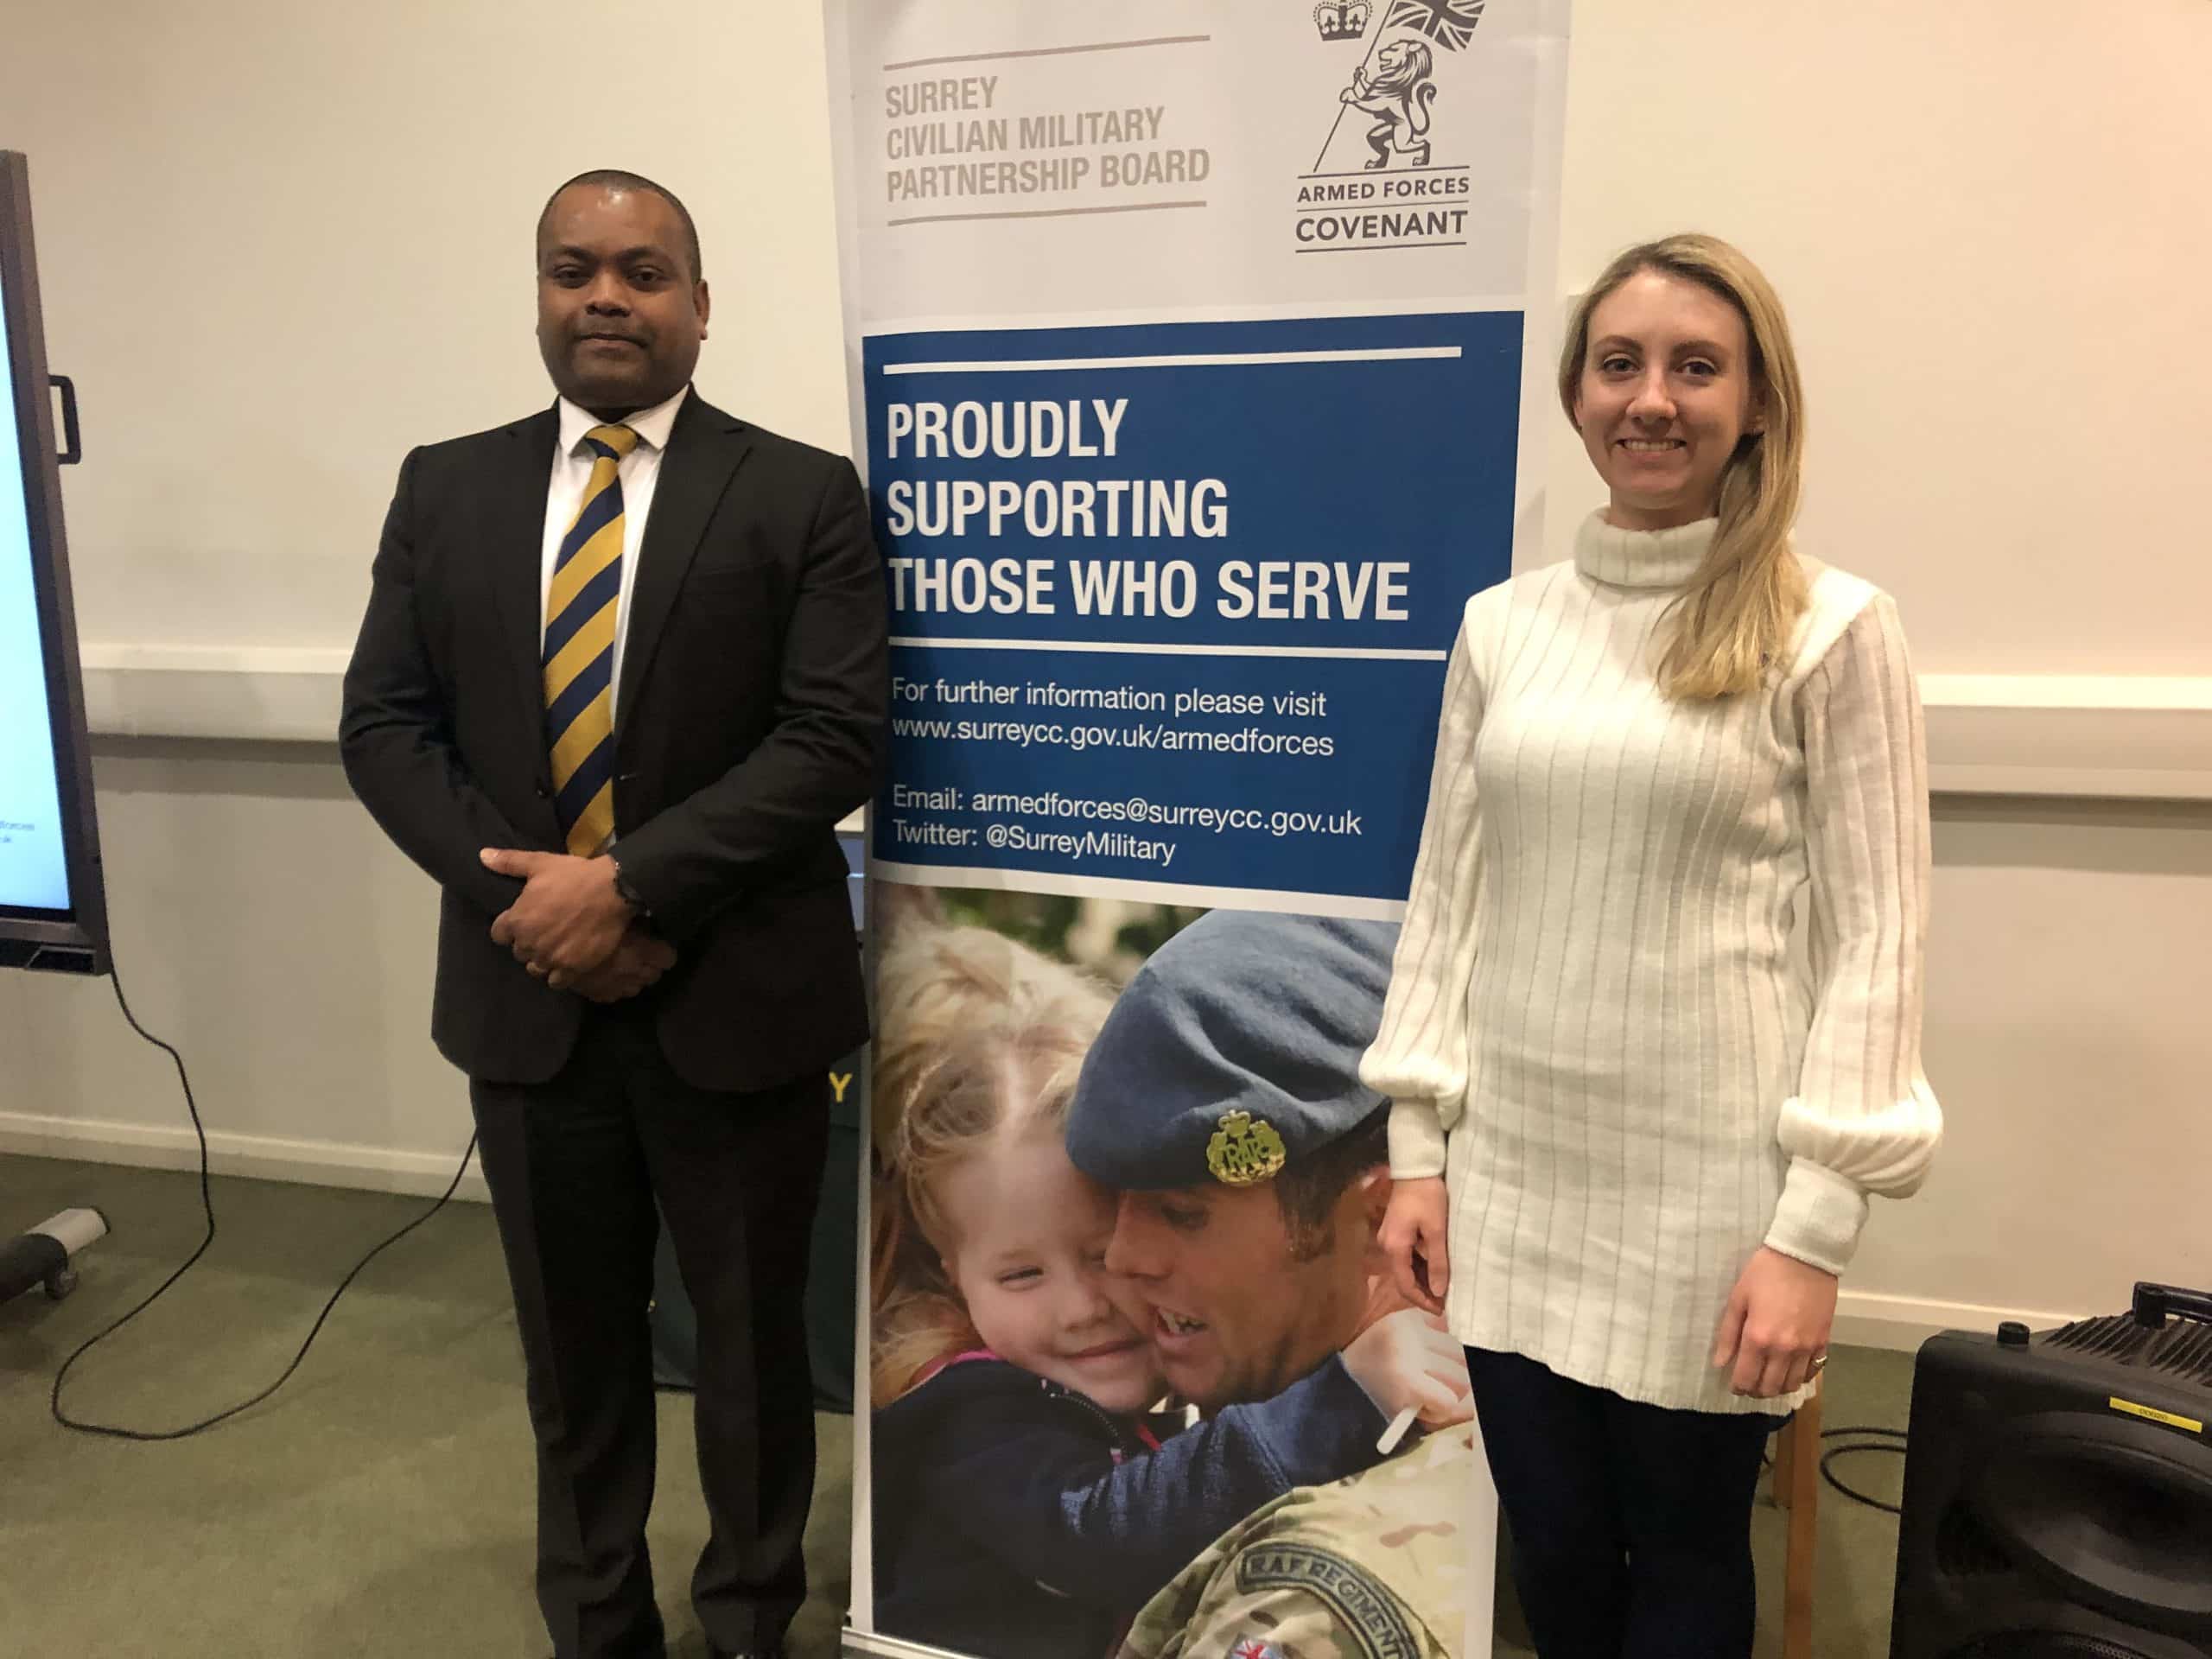 Deputy Police and Crime Commissioner Ellie Vesey-Thompson and representative of Surrey Civilian Military Partnership Board in front of their banner